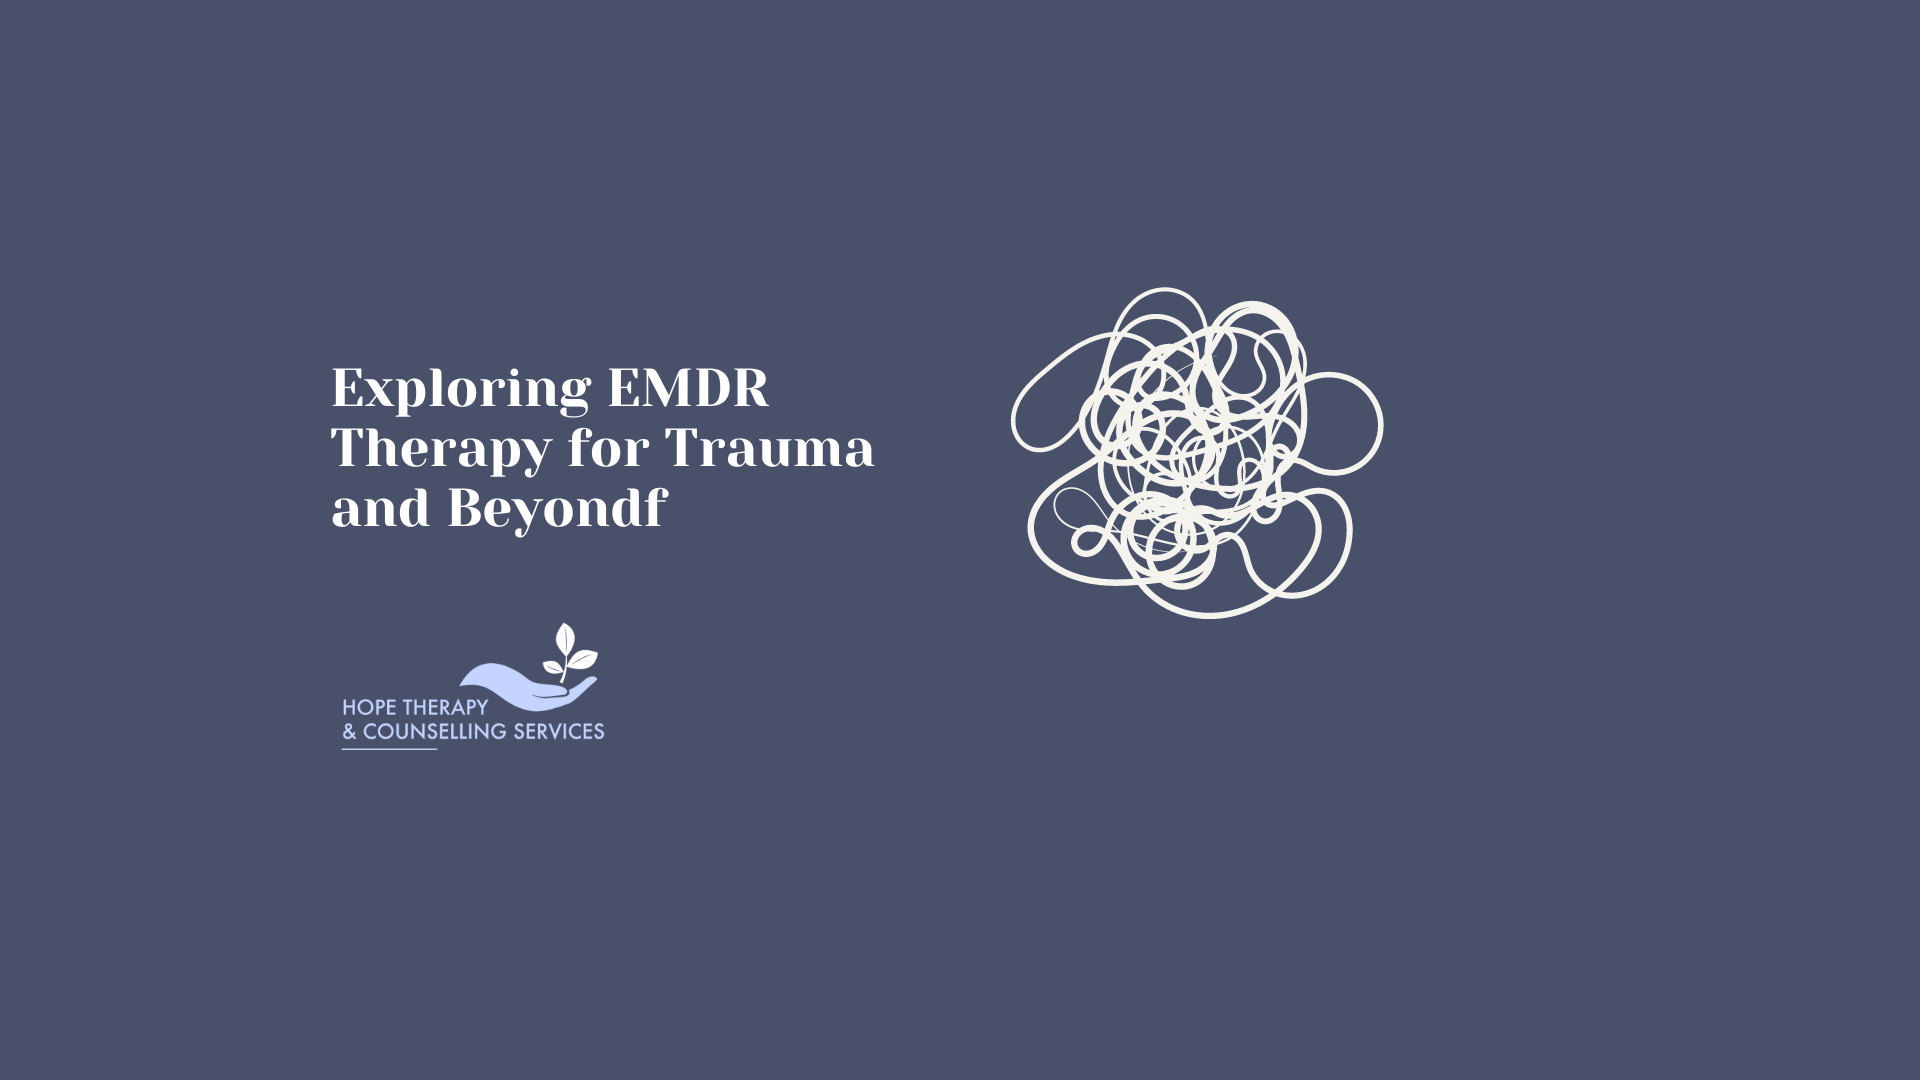 Exploring EMDR Therapy for Trauma and Beyond